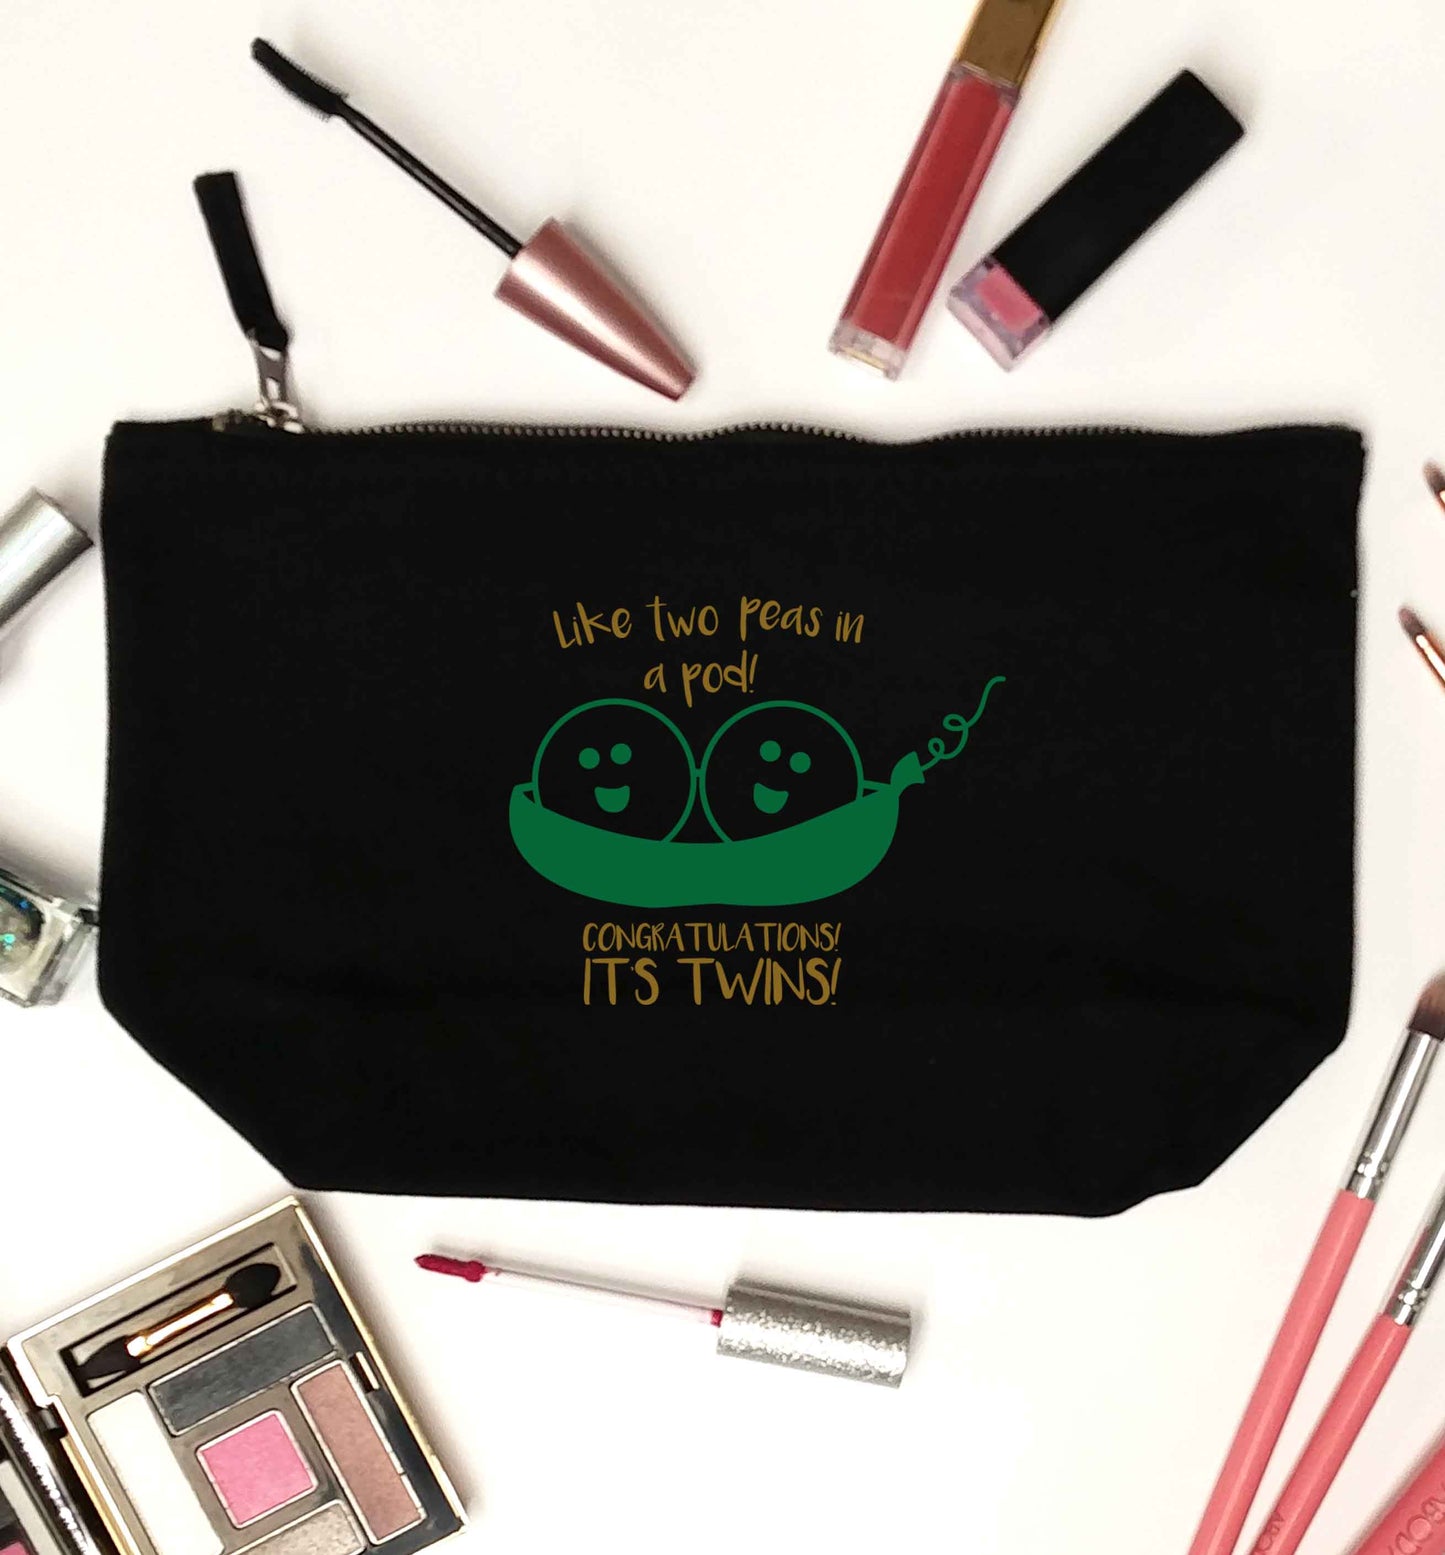 Like two peas in a pod! Congratulations it's twins! black makeup bag